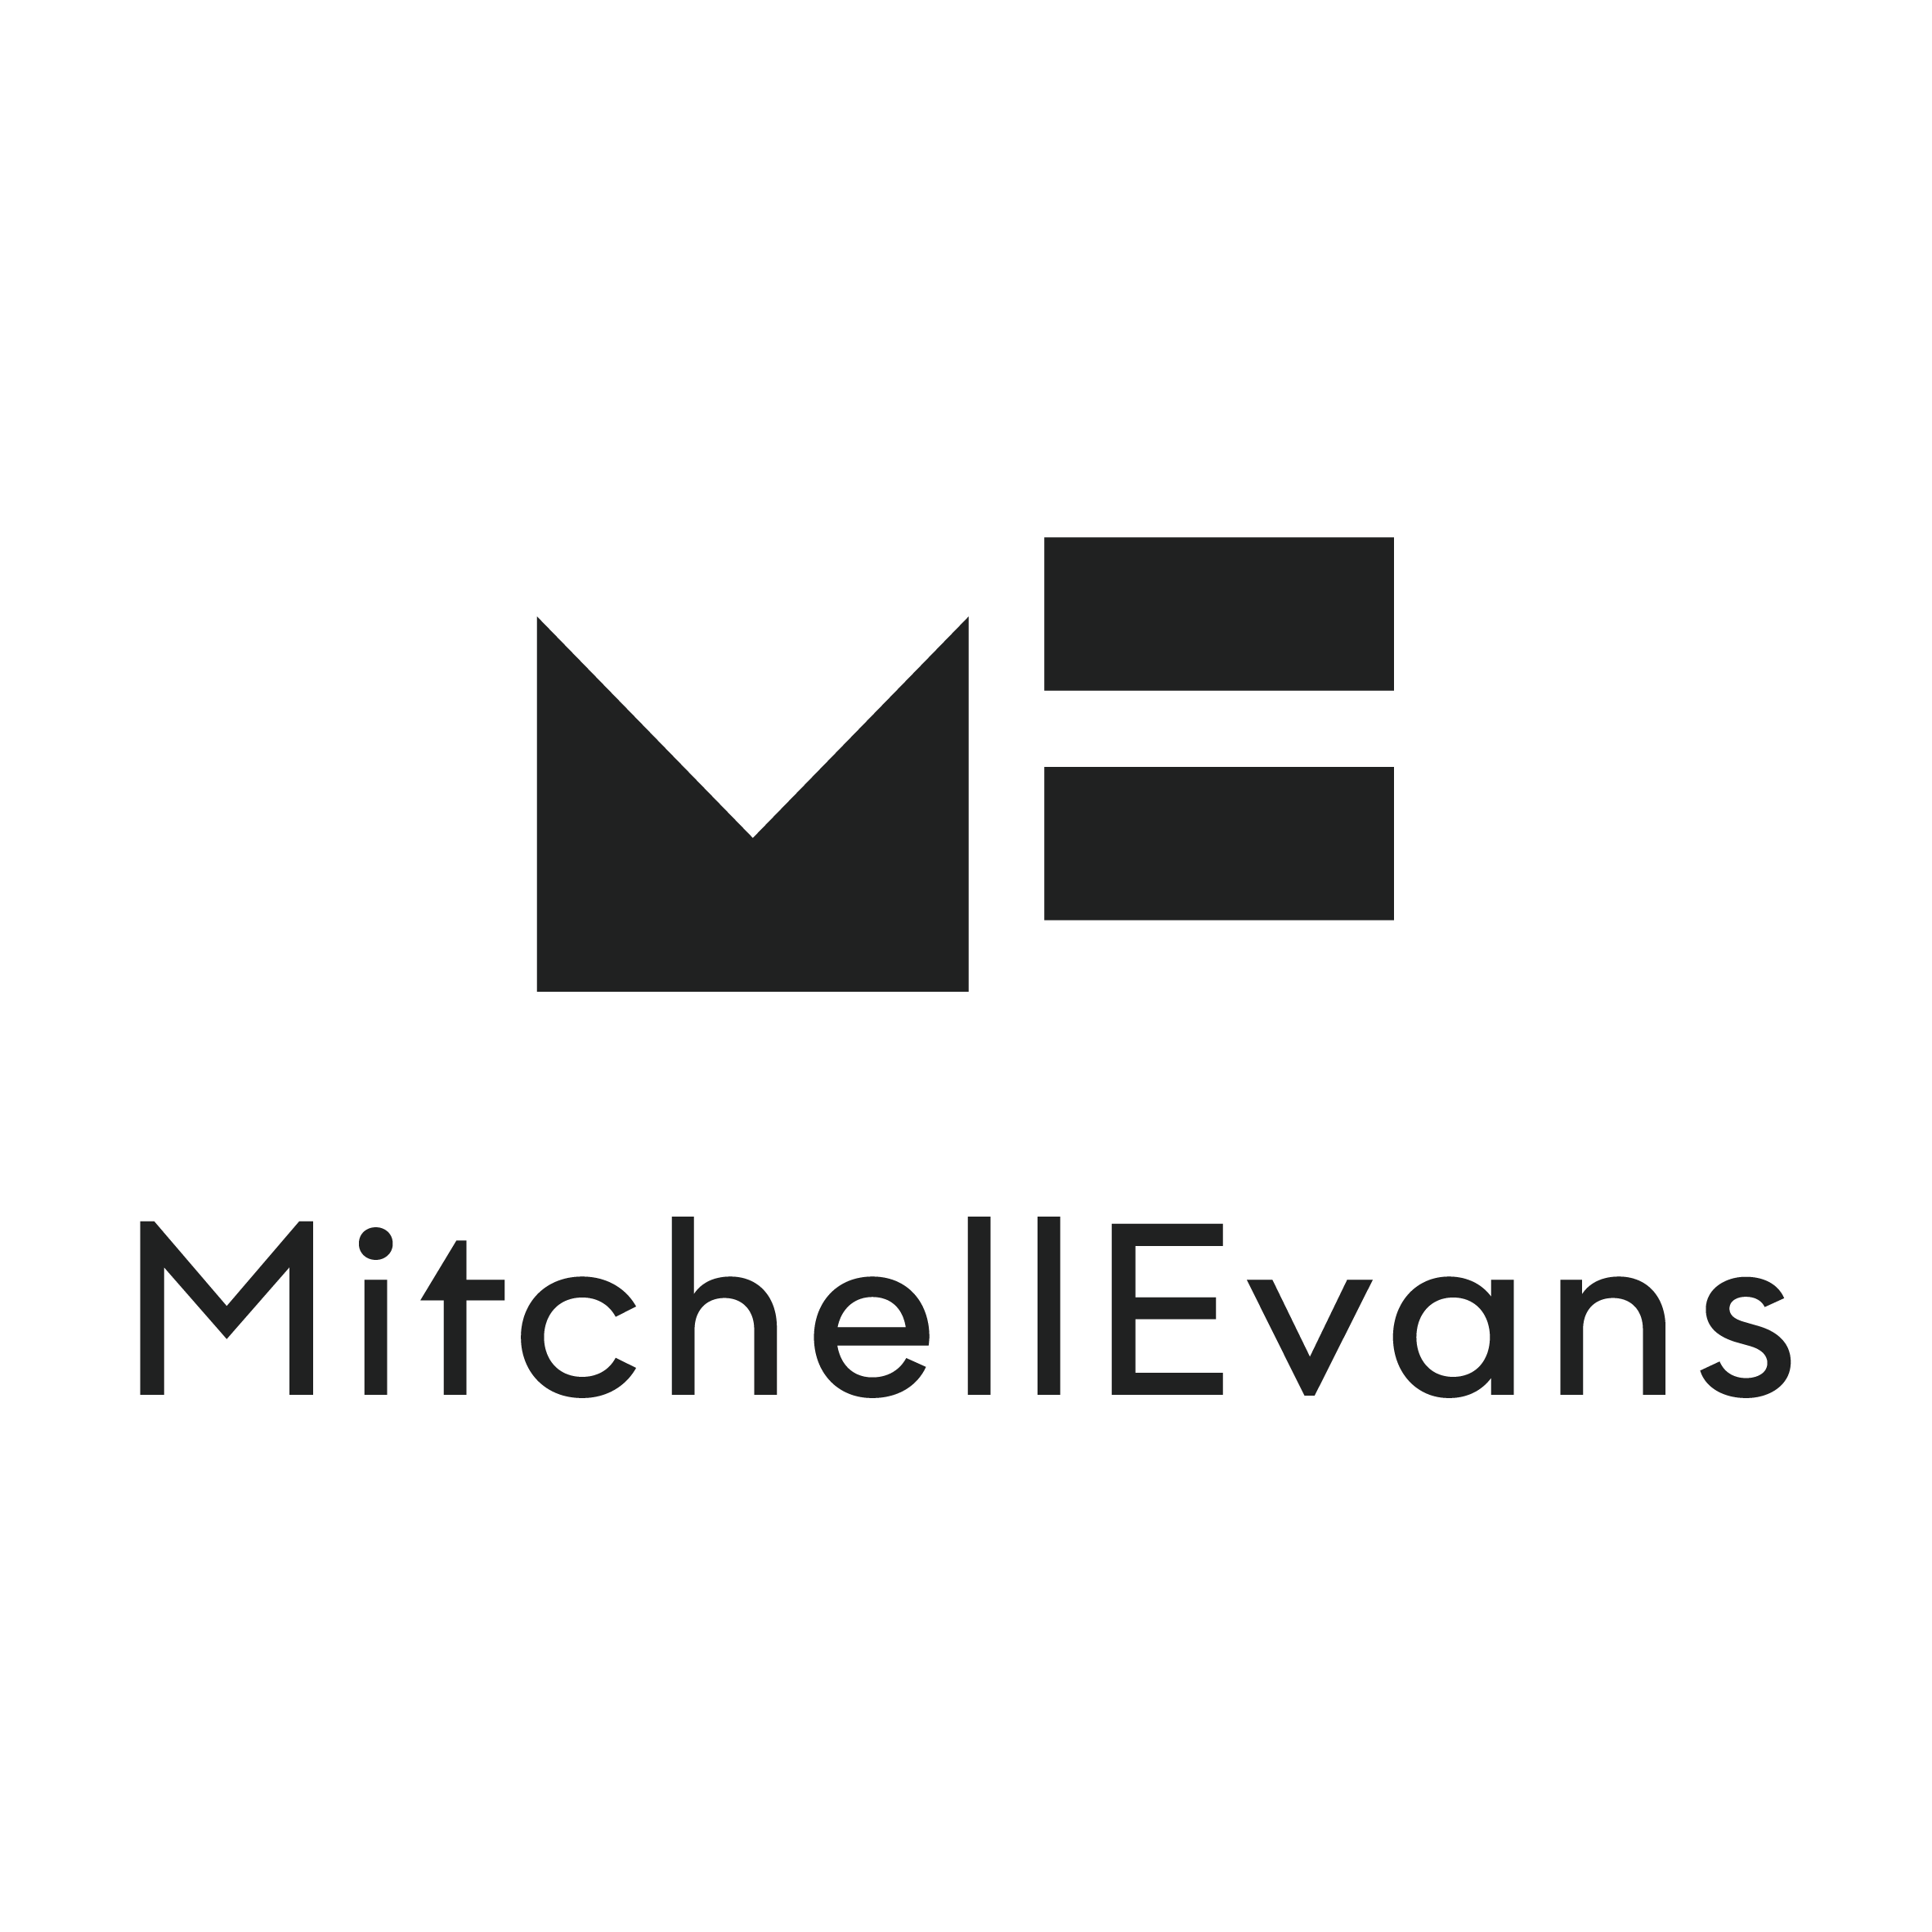 https://godalmingtownfc.co.uk/wp-content/uploads/2021/12/Mitchell-Evans-Brand-Elements-02-logo-with-words-black.png